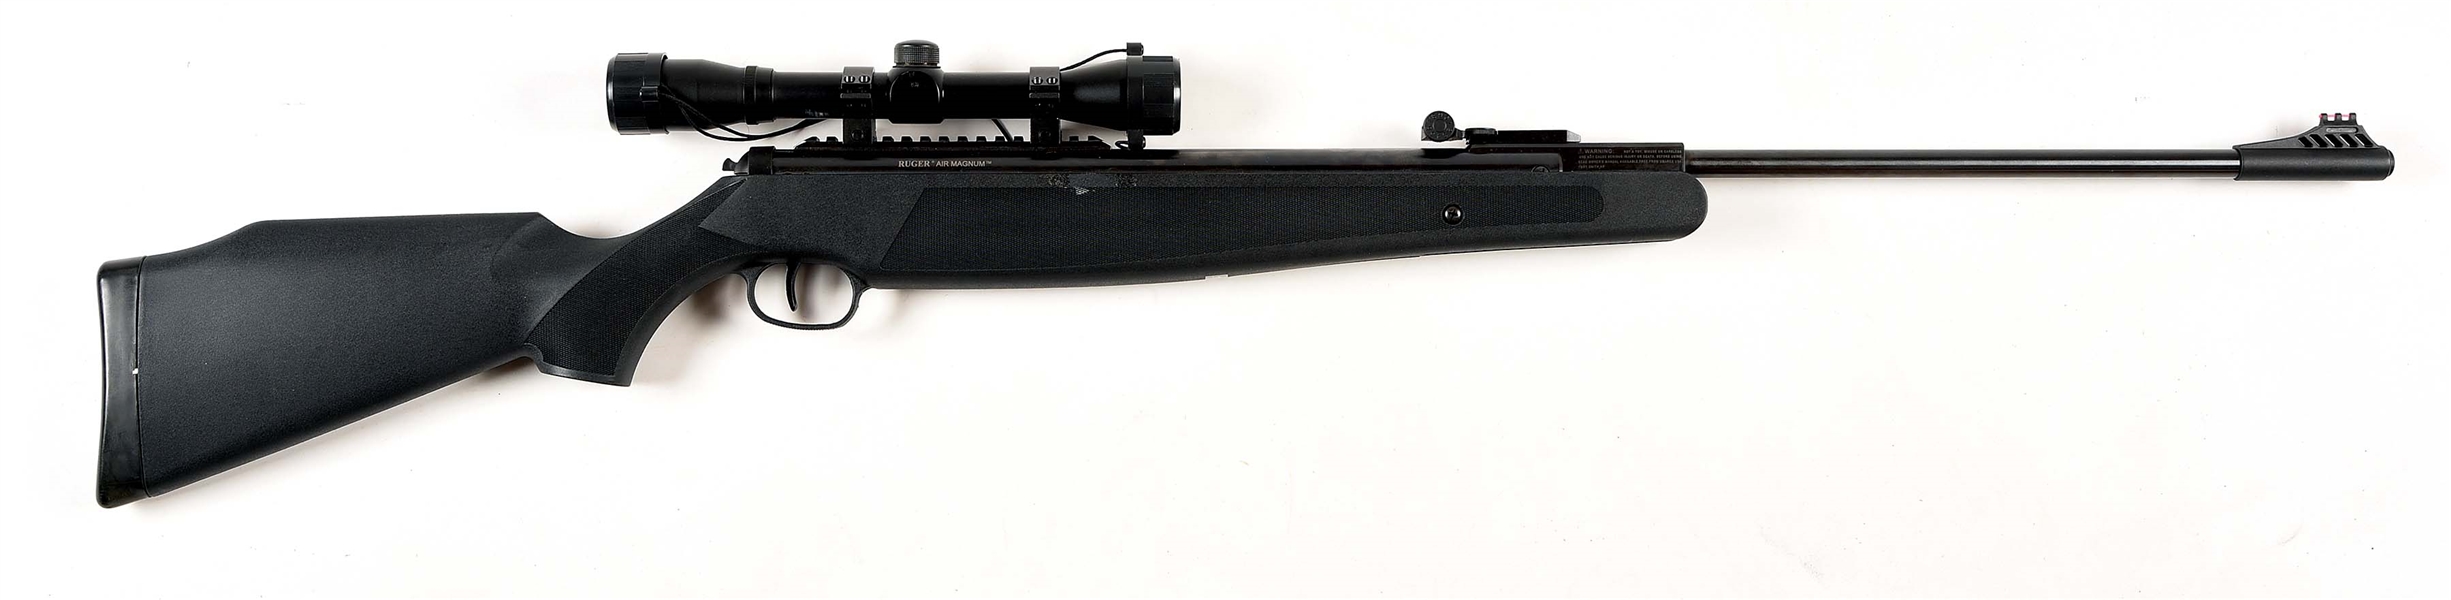 RUGER AIR MAGNUM .177 AIR RIFLE WITH SCOPE.